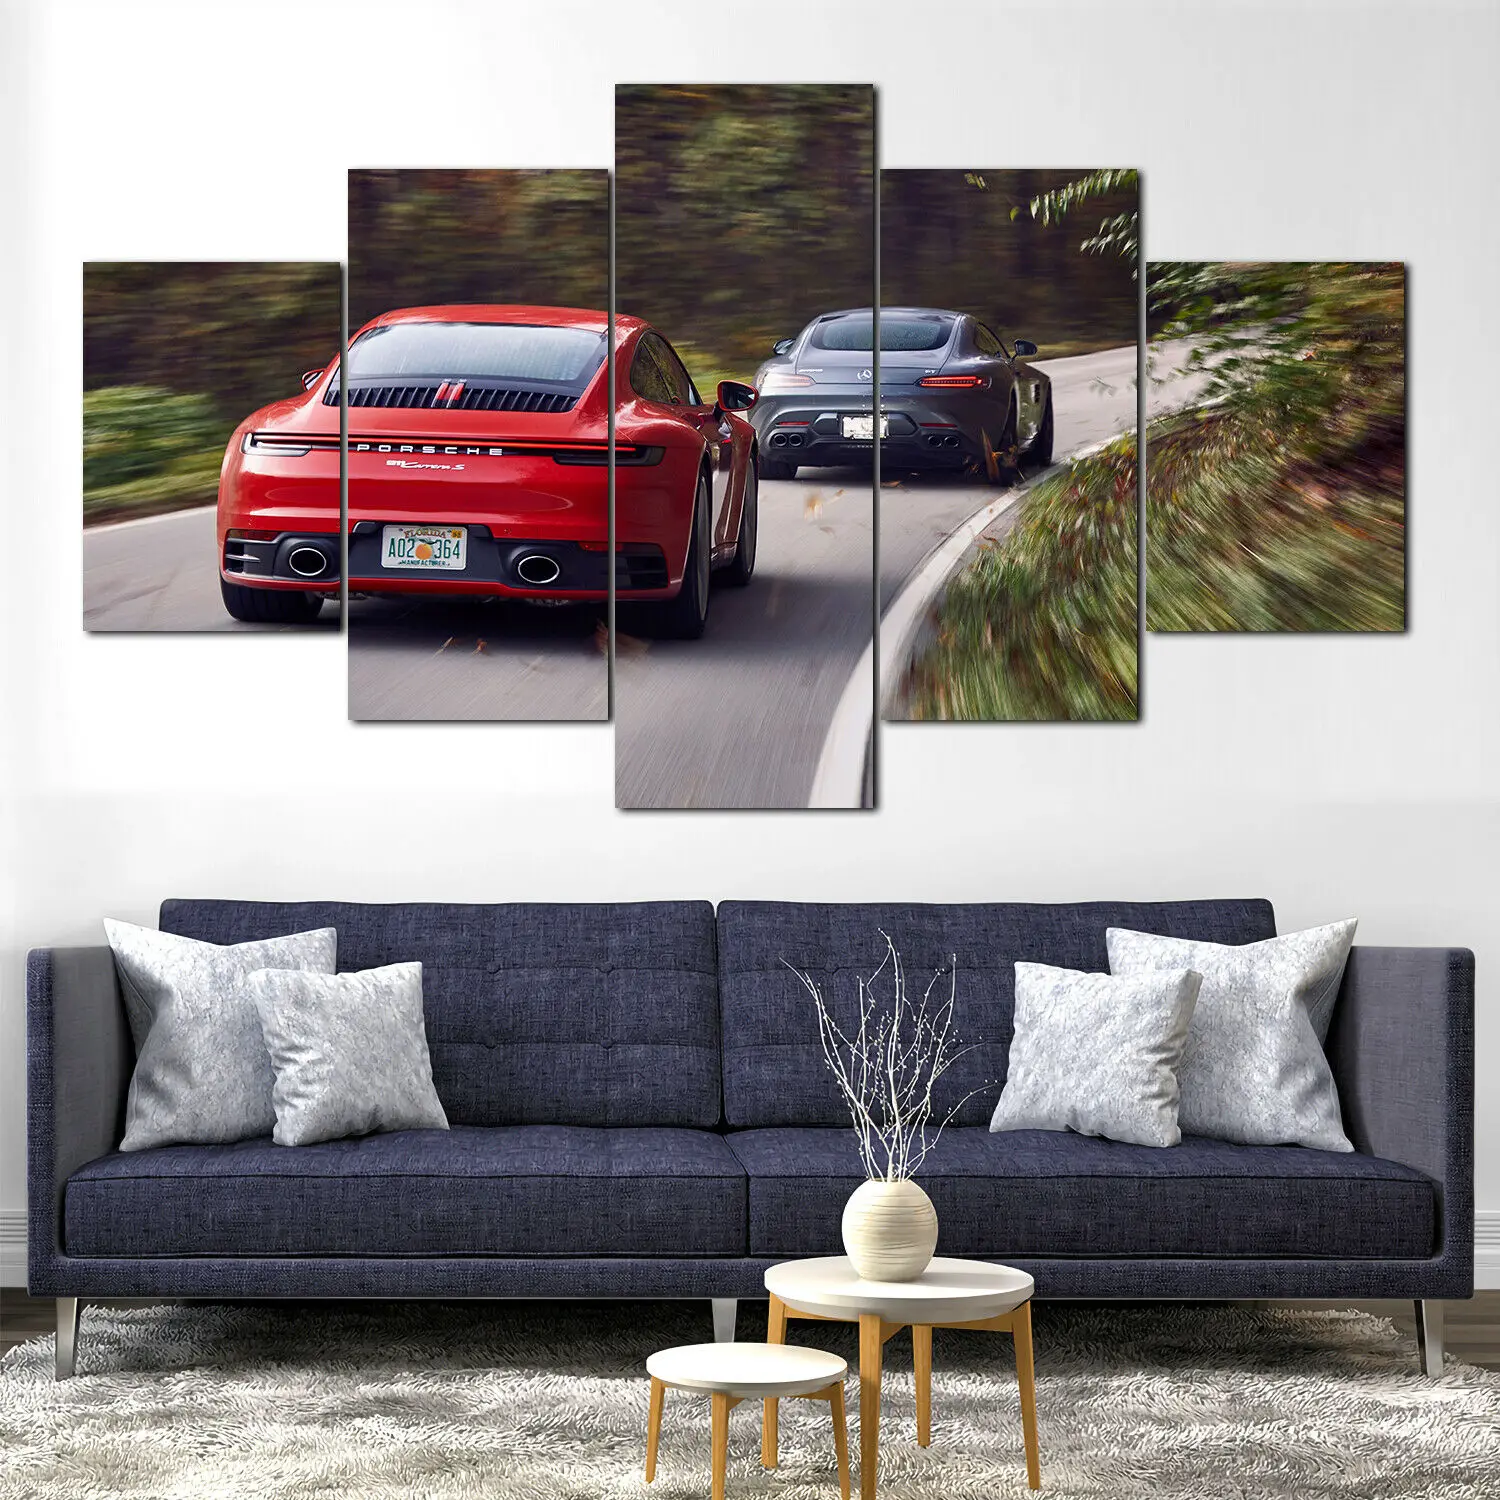 

No Framed 5Pcs Porsche 911 AMG GT Car Modular Wall Art Canvas Posters Pictures Home Decor For Living Room Paintings Decoration